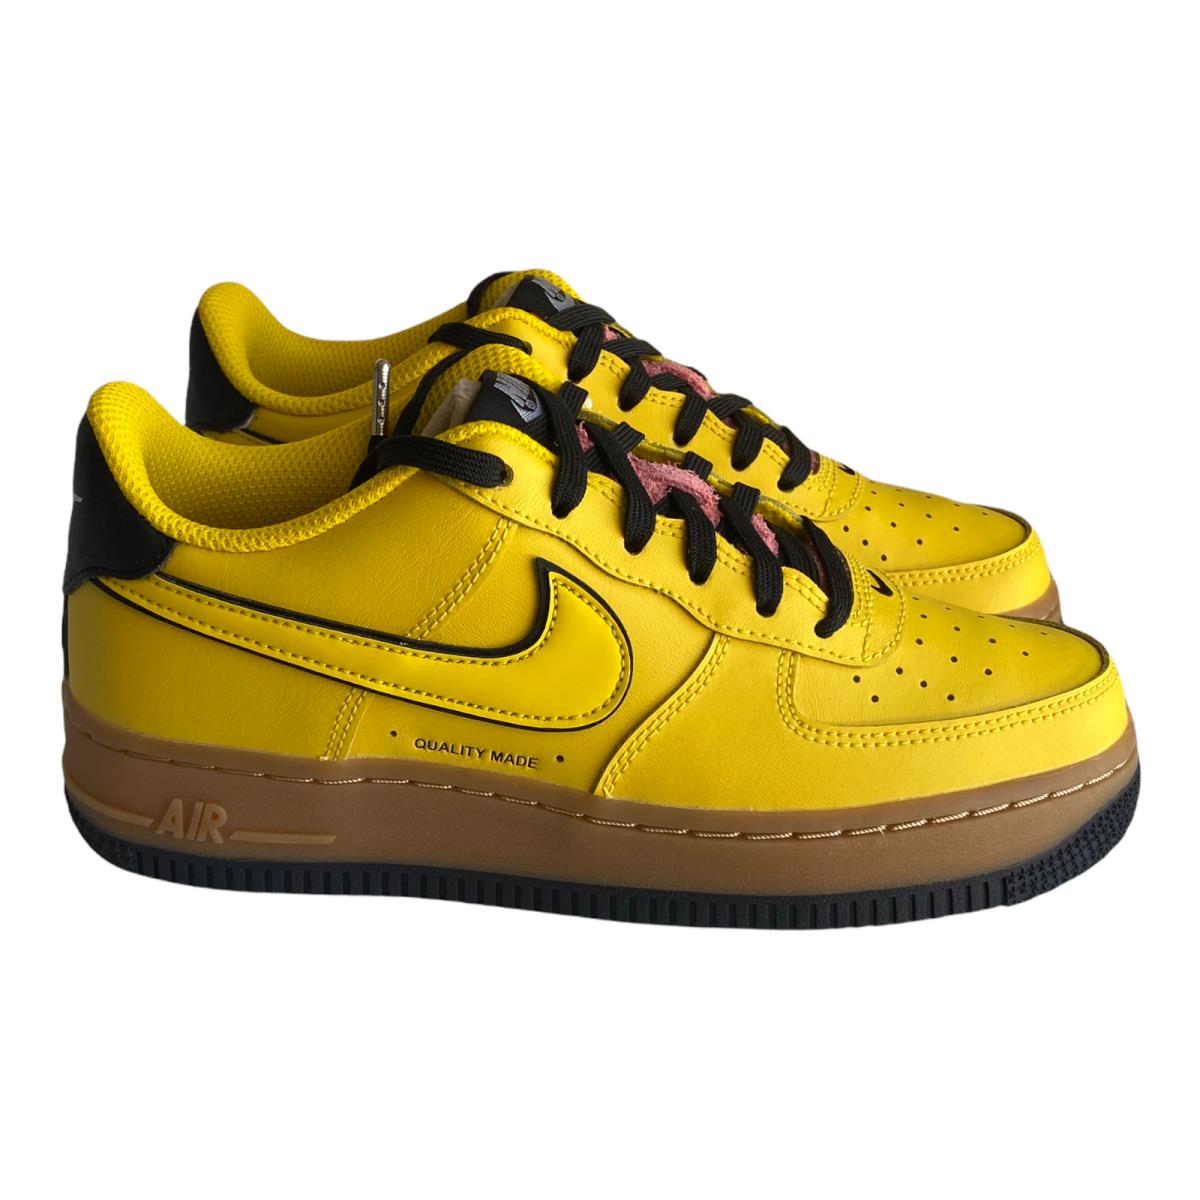 Nike Air Force 1 Low Grade School Black Yellow Gum Sneakers Size 3.5 Youth - Yellow